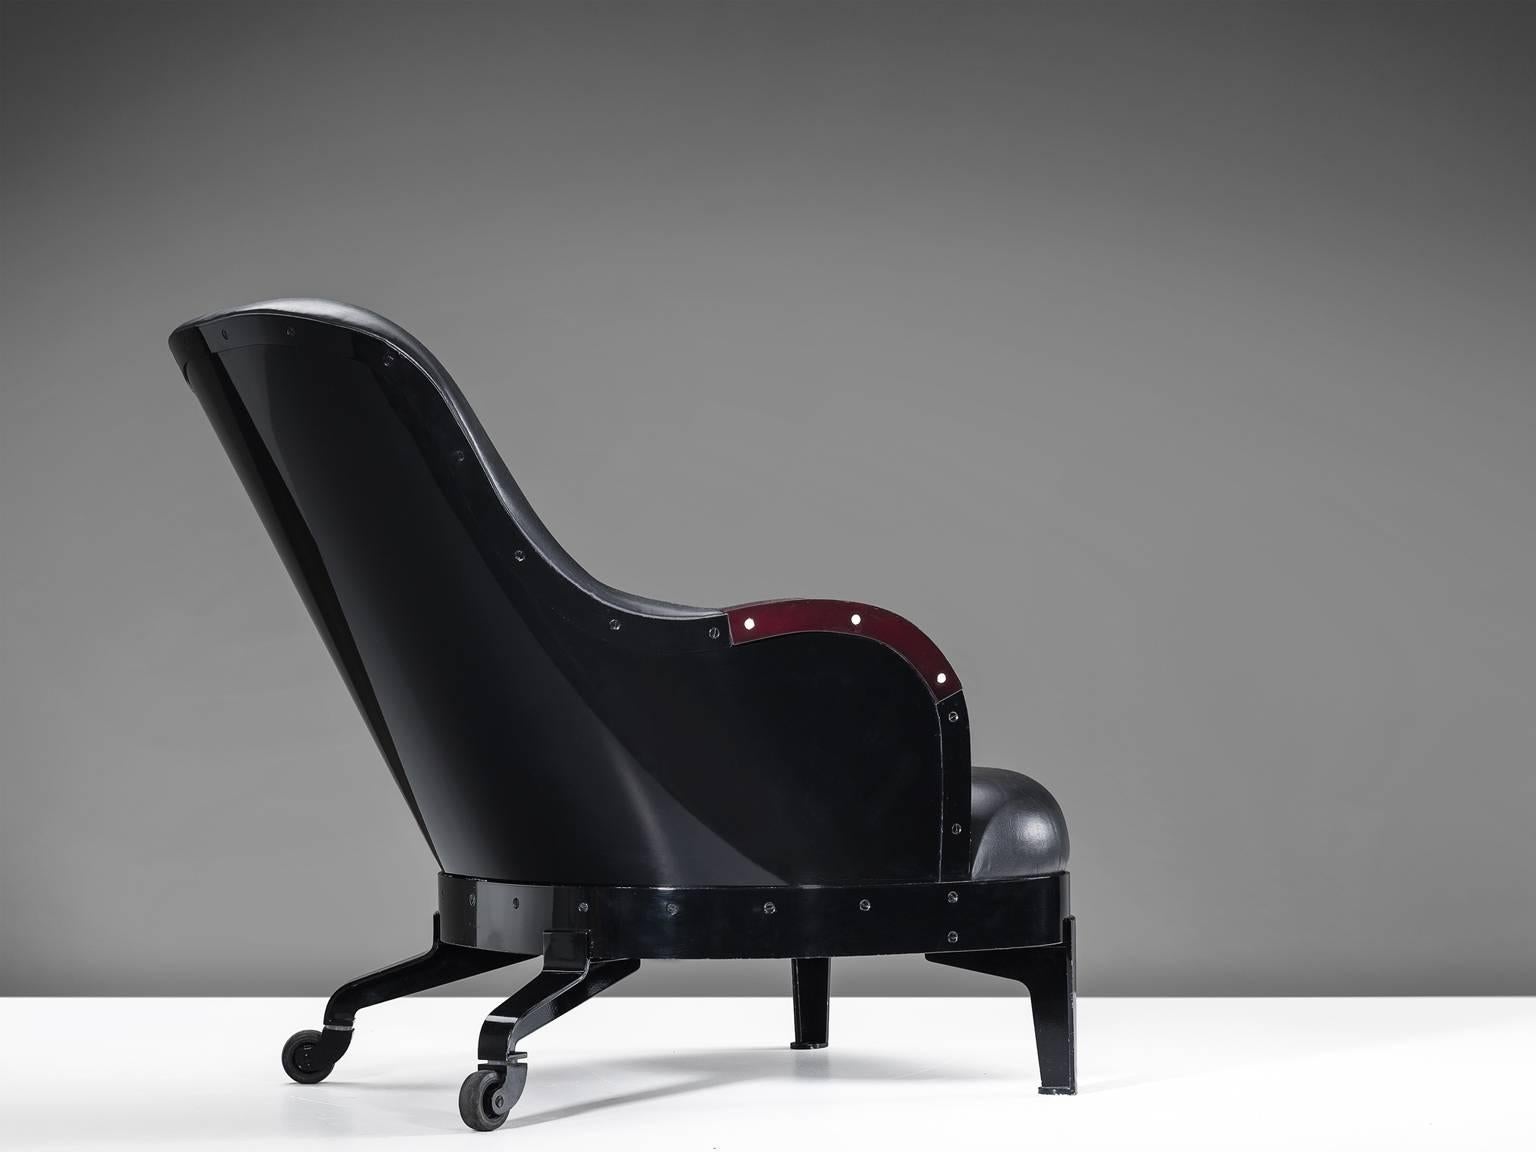 The Ritz lounge chair, in steel, wood, elk horn and leather by Mats Theselius for Källemo, Sweden, 1994.
 
This limited edition lounge chair with caster wheels is executed in black enamel steel, black leather upholstery and elk Horn inlay on the